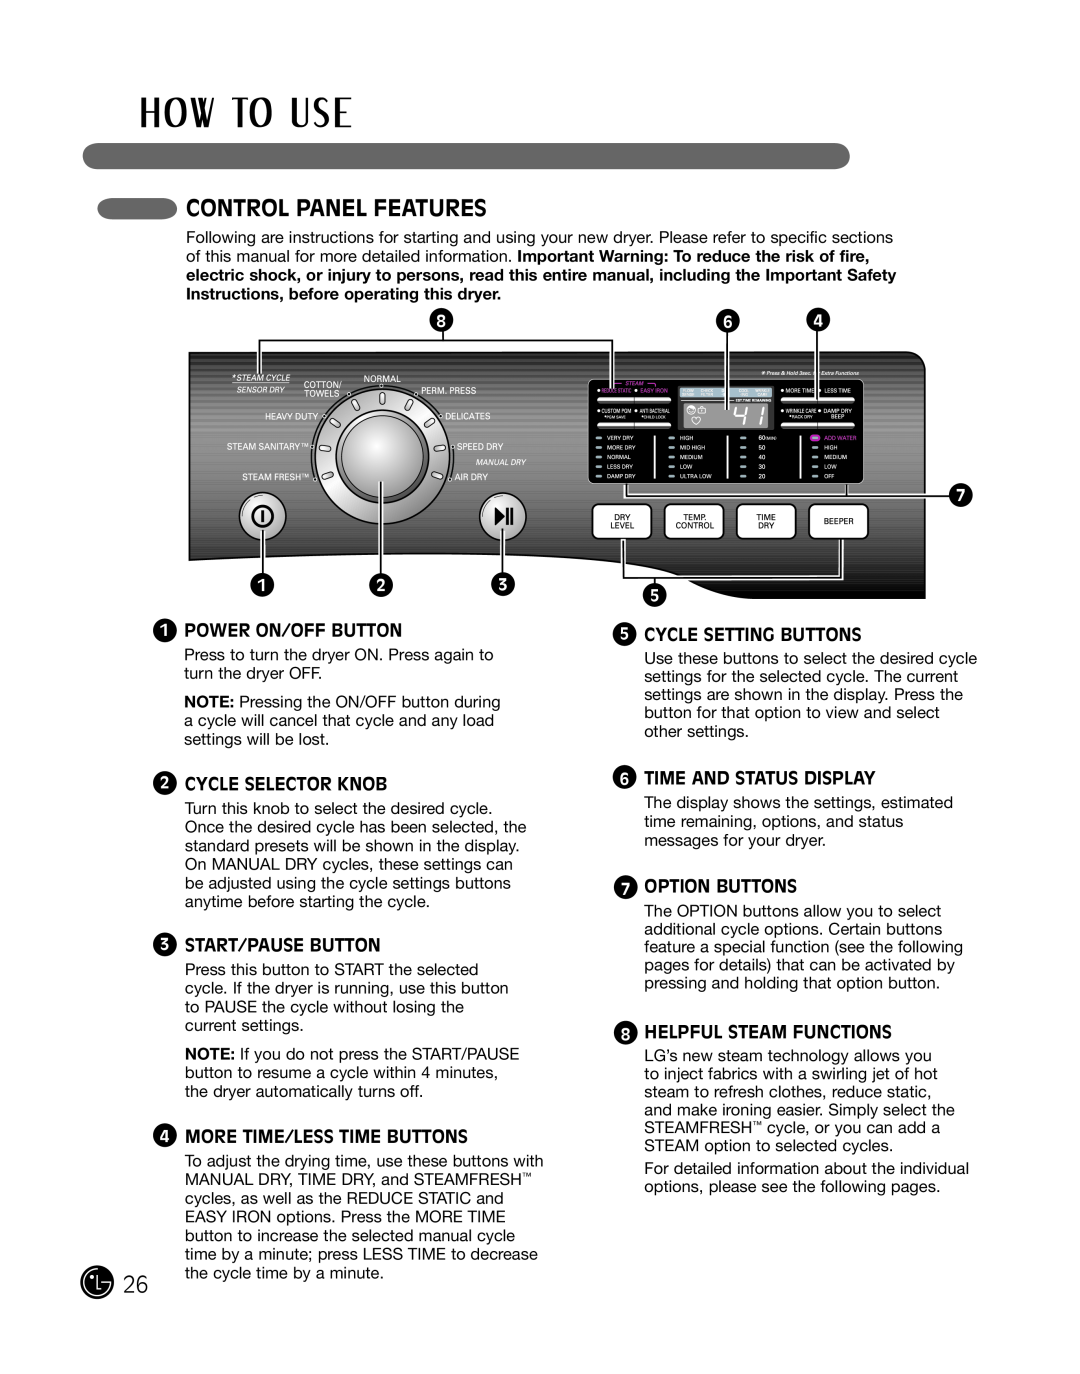 LG Electronics P154 manual Control Panel Features, Power On/Off Button, Cycle Setting Buttons, Cycle Selector Knob 